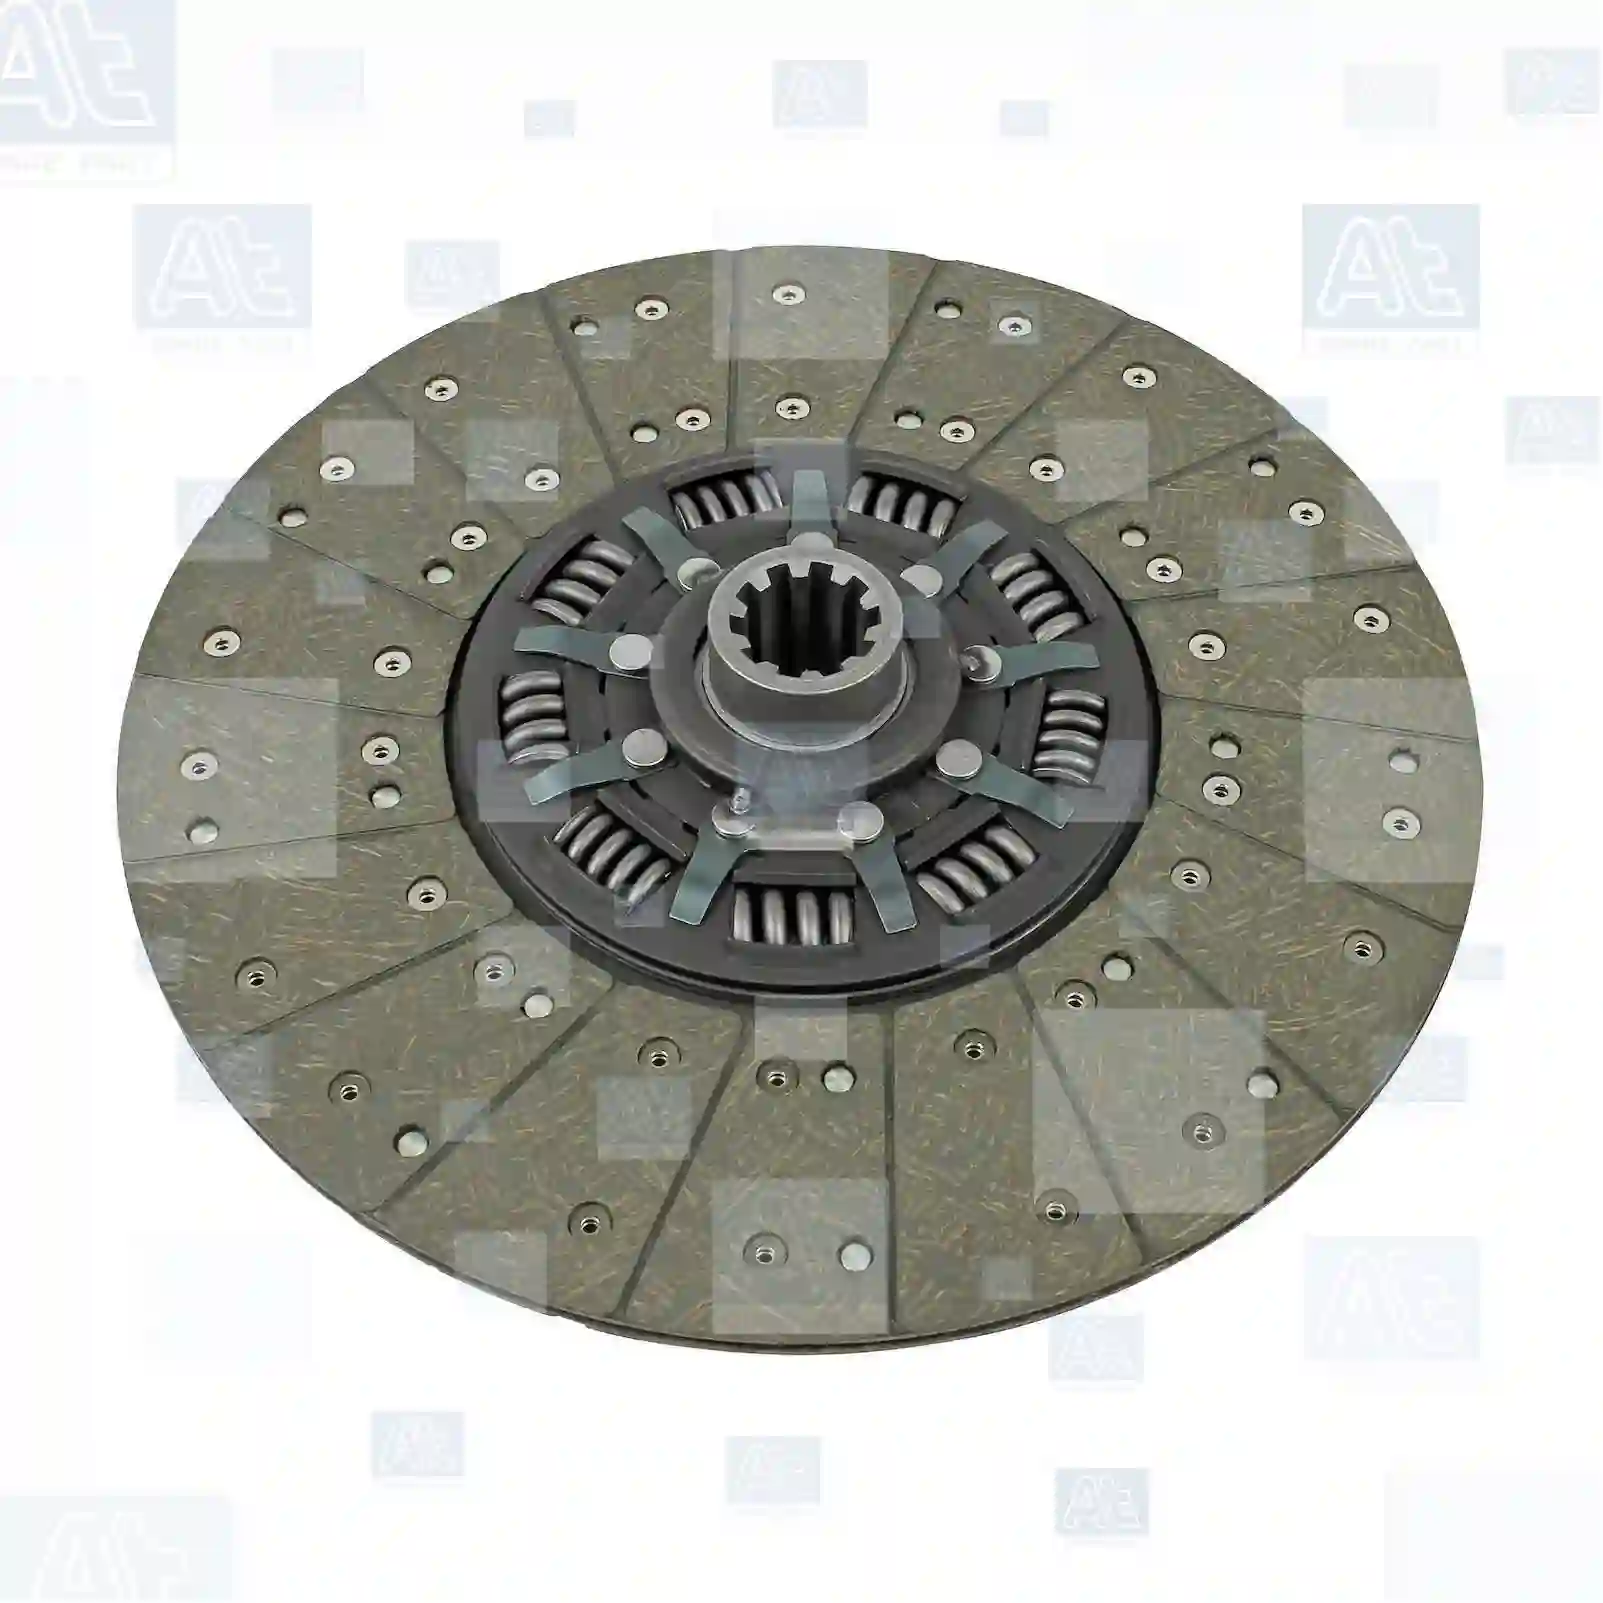 Clutch disc, at no 77721938, oem no: 01903883, 01903885, 01903888, 01903957, 01903958, 01903959, 01904700, 01904777, 42003637, 42037017, 42037018, 42062541, 42102171, 000250250100, 01903883, 01903885, 01903888, 01903958, 01903959, 01904700, 01904777, 42003637, 42037017, 42037018, 42062541, 42102171, 42132100, 5000822629, 81303010112, 81303010116, 81303010148, 81303010162, 81303010249, 81303010290, 81303010342, 81303010990, 81303016148, 81303019112, 81303019116, 81303019148, 81303019162, 81303019249, 81303019290, 81303019342, N1011009994, 0052502103, 0052502203, 0052502303, 0062508703, 0072500503, 0082509503, 0092502303, 0092504503, 0122501103, 0122502403, 0122502503, 0122502603, 012250260380, 0122503303, 0152503403, 0152503603, 0192503703, 0192503803, 6082500103, 011009994, 014008832, 040115100, 040142441, 042130700, 042130800, 042132100, 072500503, 81303010249, 81303010342, 5000278271, 5000822629, 5800207049, 8383185000, 8383260000, 8383312000, 83833120000, 83833120002, 5336236, 5483190, 5609004, 5616893, 5637071 At Spare Part | Engine, Accelerator Pedal, Camshaft, Connecting Rod, Crankcase, Crankshaft, Cylinder Head, Engine Suspension Mountings, Exhaust Manifold, Exhaust Gas Recirculation, Filter Kits, Flywheel Housing, General Overhaul Kits, Engine, Intake Manifold, Oil Cleaner, Oil Cooler, Oil Filter, Oil Pump, Oil Sump, Piston & Liner, Sensor & Switch, Timing Case, Turbocharger, Cooling System, Belt Tensioner, Coolant Filter, Coolant Pipe, Corrosion Prevention Agent, Drive, Expansion Tank, Fan, Intercooler, Monitors & Gauges, Radiator, Thermostat, V-Belt / Timing belt, Water Pump, Fuel System, Electronical Injector Unit, Feed Pump, Fuel Filter, cpl., Fuel Gauge Sender,  Fuel Line, Fuel Pump, Fuel Tank, Injection Line Kit, Injection Pump, Exhaust System, Clutch & Pedal, Gearbox, Propeller Shaft, Axles, Brake System, Hubs & Wheels, Suspension, Leaf Spring, Universal Parts / Accessories, Steering, Electrical System, Cabin Clutch disc, at no 77721938, oem no: 01903883, 01903885, 01903888, 01903957, 01903958, 01903959, 01904700, 01904777, 42003637, 42037017, 42037018, 42062541, 42102171, 000250250100, 01903883, 01903885, 01903888, 01903958, 01903959, 01904700, 01904777, 42003637, 42037017, 42037018, 42062541, 42102171, 42132100, 5000822629, 81303010112, 81303010116, 81303010148, 81303010162, 81303010249, 81303010290, 81303010342, 81303010990, 81303016148, 81303019112, 81303019116, 81303019148, 81303019162, 81303019249, 81303019290, 81303019342, N1011009994, 0052502103, 0052502203, 0052502303, 0062508703, 0072500503, 0082509503, 0092502303, 0092504503, 0122501103, 0122502403, 0122502503, 0122502603, 012250260380, 0122503303, 0152503403, 0152503603, 0192503703, 0192503803, 6082500103, 011009994, 014008832, 040115100, 040142441, 042130700, 042130800, 042132100, 072500503, 81303010249, 81303010342, 5000278271, 5000822629, 5800207049, 8383185000, 8383260000, 8383312000, 83833120000, 83833120002, 5336236, 5483190, 5609004, 5616893, 5637071 At Spare Part | Engine, Accelerator Pedal, Camshaft, Connecting Rod, Crankcase, Crankshaft, Cylinder Head, Engine Suspension Mountings, Exhaust Manifold, Exhaust Gas Recirculation, Filter Kits, Flywheel Housing, General Overhaul Kits, Engine, Intake Manifold, Oil Cleaner, Oil Cooler, Oil Filter, Oil Pump, Oil Sump, Piston & Liner, Sensor & Switch, Timing Case, Turbocharger, Cooling System, Belt Tensioner, Coolant Filter, Coolant Pipe, Corrosion Prevention Agent, Drive, Expansion Tank, Fan, Intercooler, Monitors & Gauges, Radiator, Thermostat, V-Belt / Timing belt, Water Pump, Fuel System, Electronical Injector Unit, Feed Pump, Fuel Filter, cpl., Fuel Gauge Sender,  Fuel Line, Fuel Pump, Fuel Tank, Injection Line Kit, Injection Pump, Exhaust System, Clutch & Pedal, Gearbox, Propeller Shaft, Axles, Brake System, Hubs & Wheels, Suspension, Leaf Spring, Universal Parts / Accessories, Steering, Electrical System, Cabin